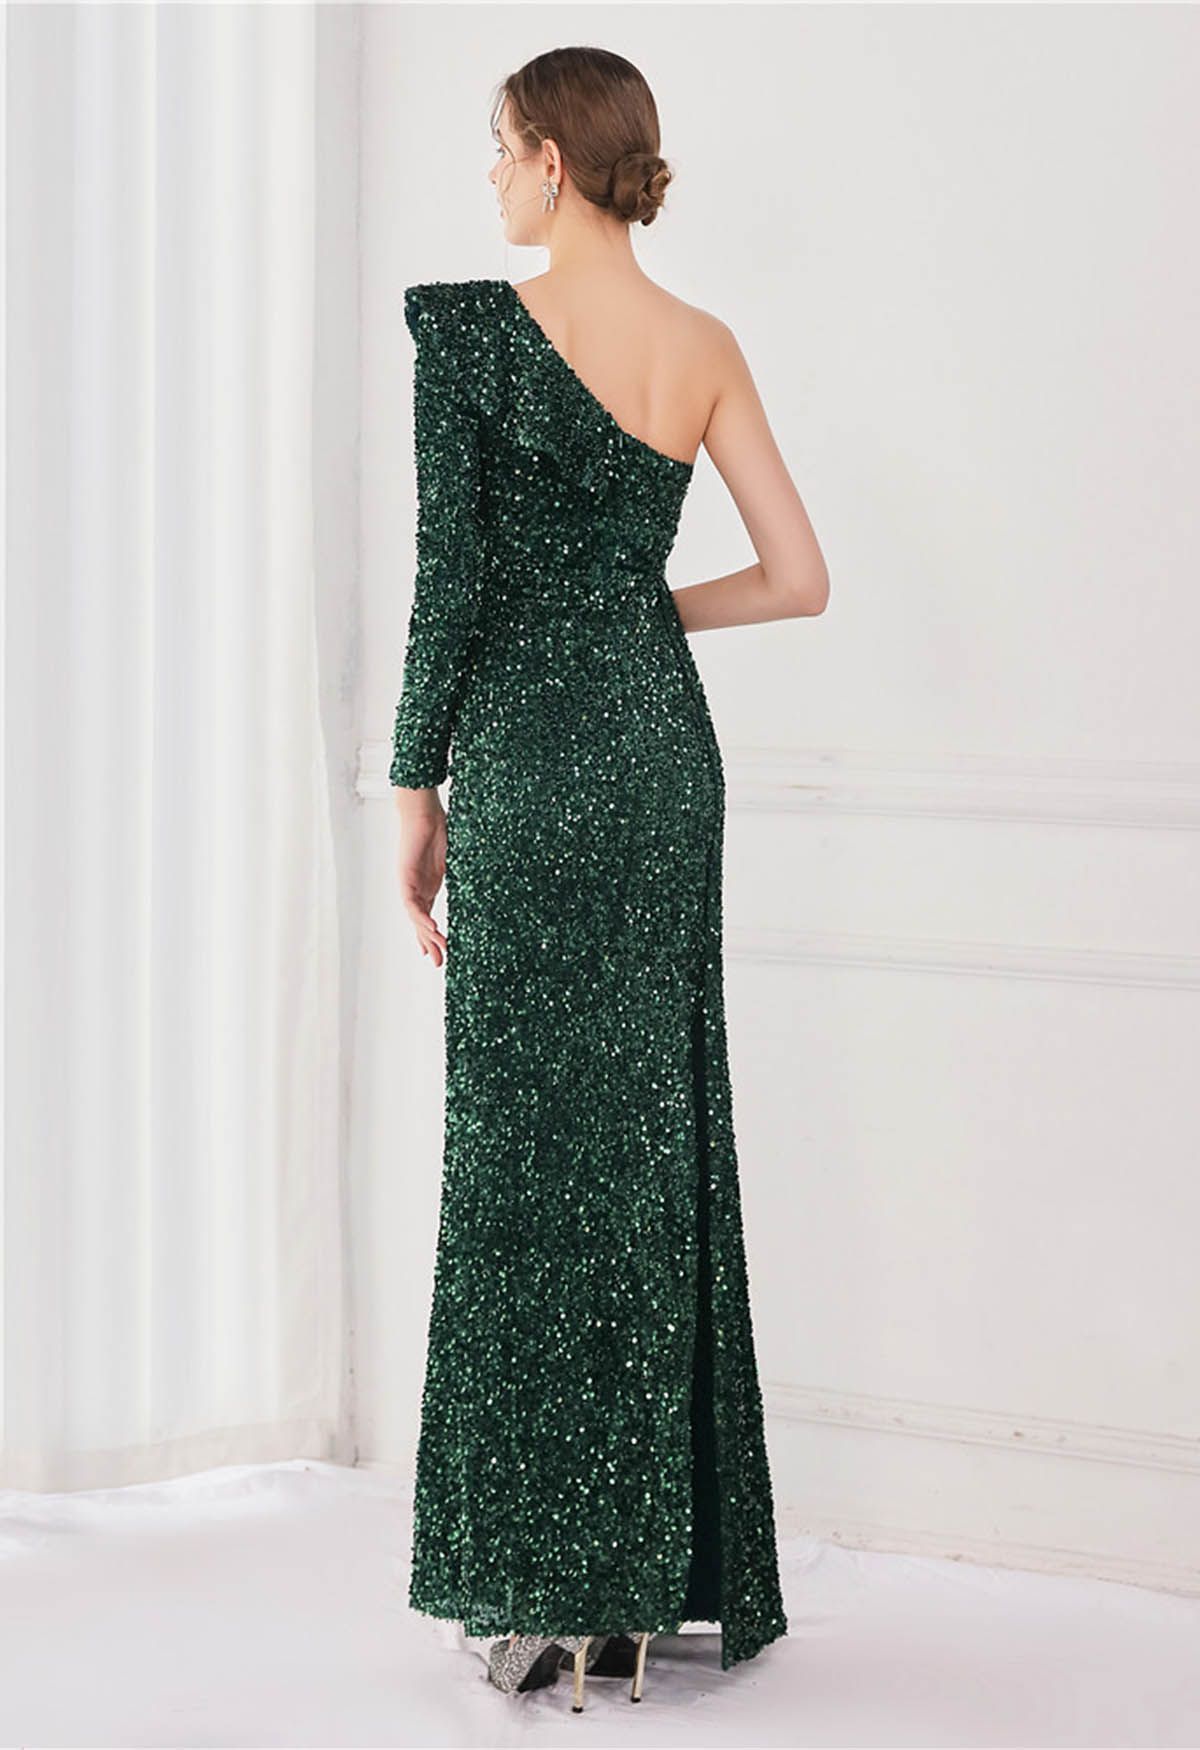 One-Shoulder Sequined Ruffle Slit Maxi Gown in Dark Green